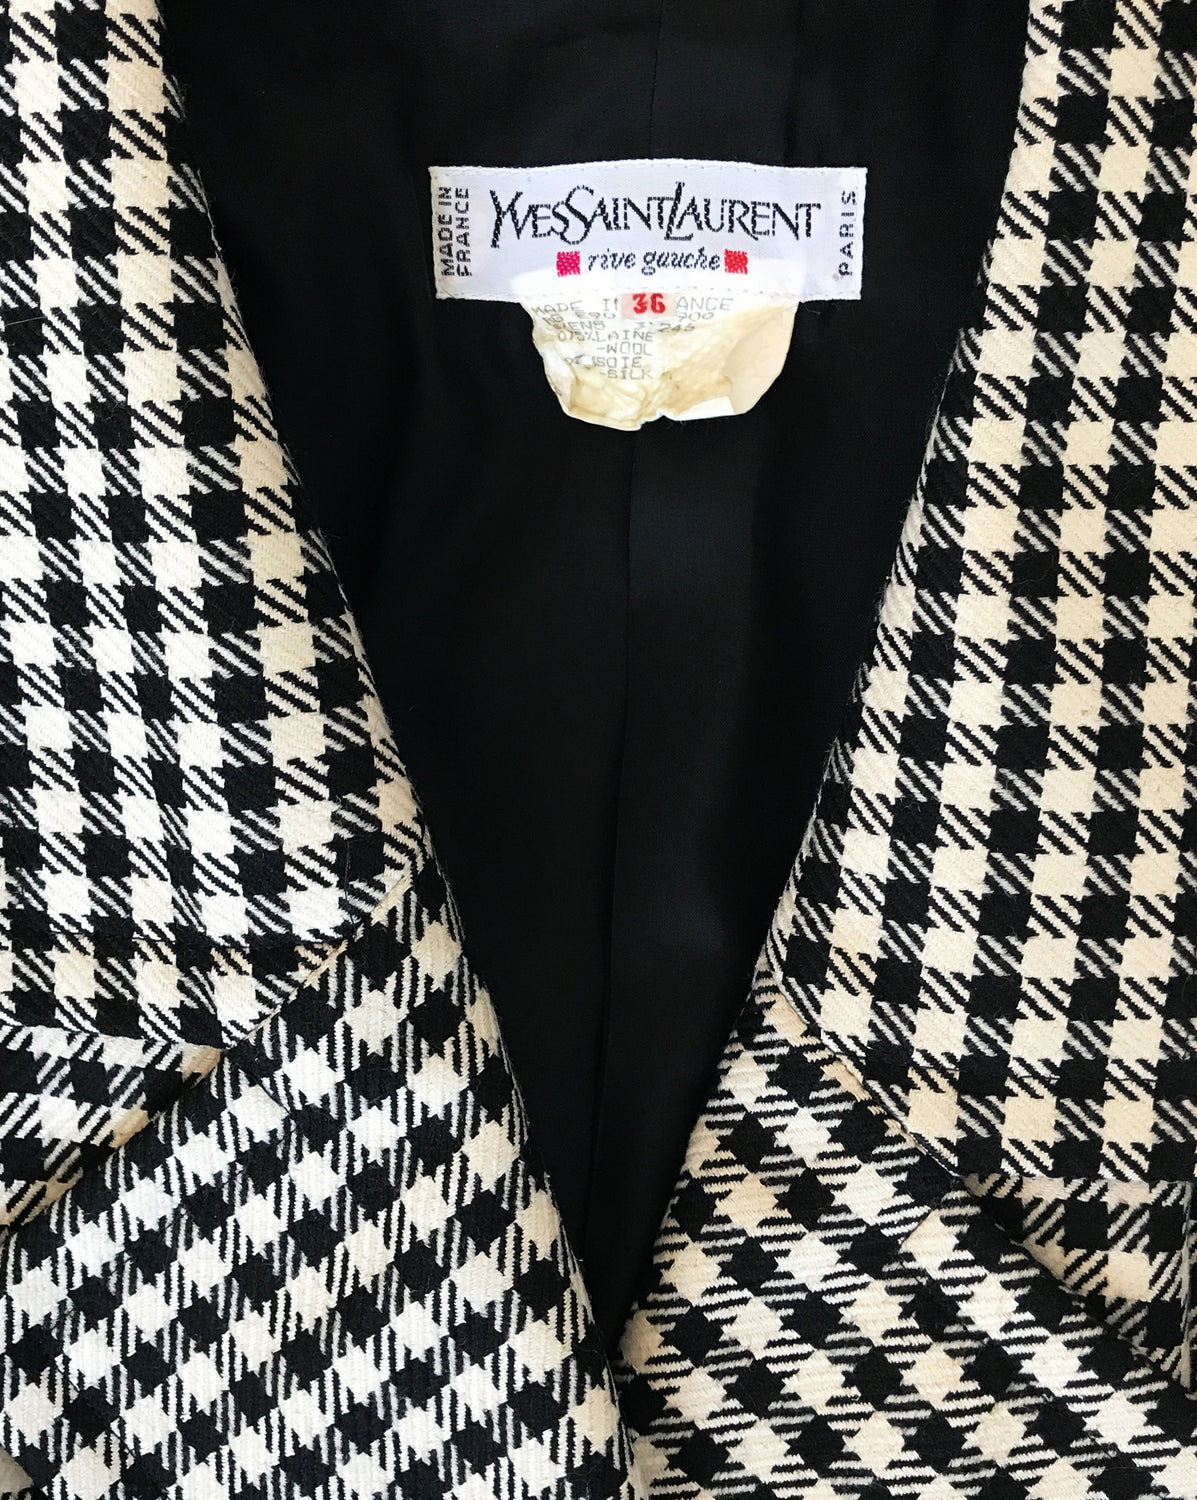 1987 SHOP Vintage Yves Saint Laurent Cropped Check Jacket 1980s hounds tooth